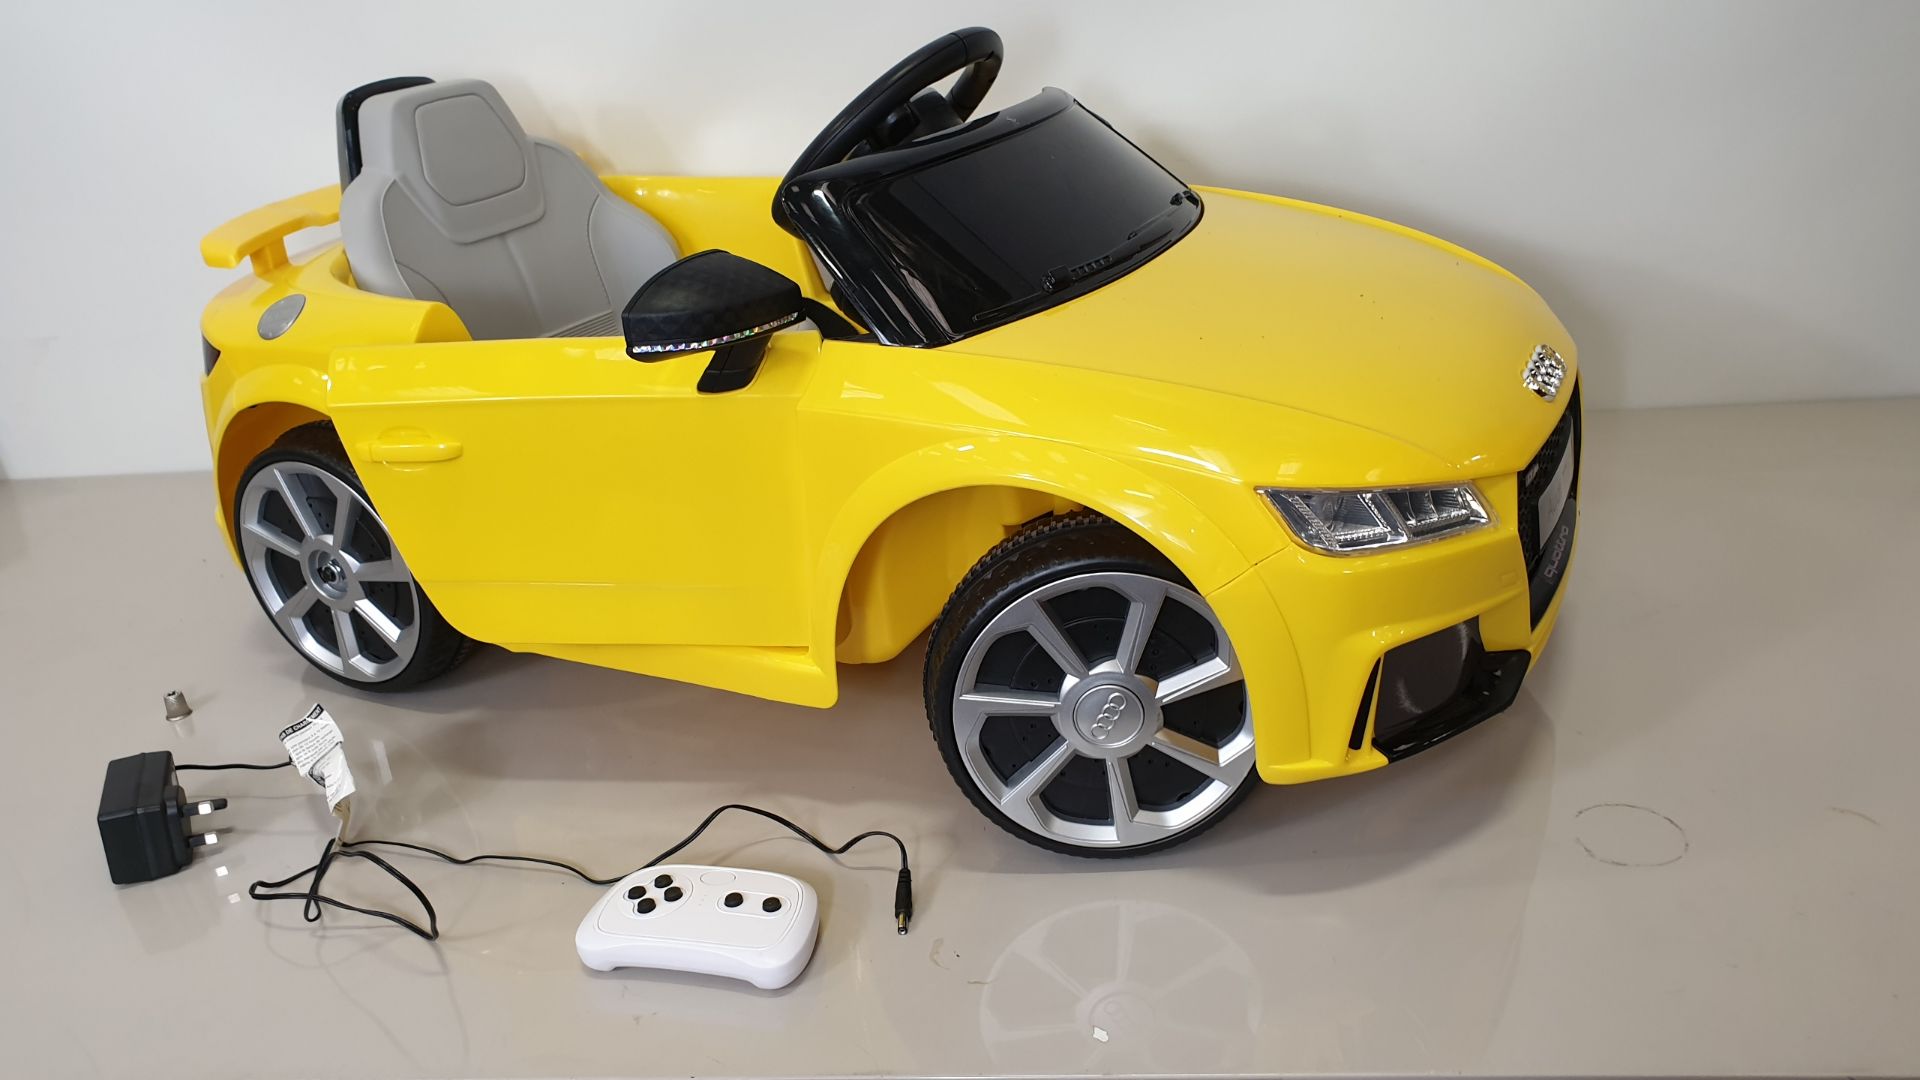 BRAND NEW BOXED AUDI TT 12V CHILDREN'S BATTERY OPERATED RECHARGEABLE ELECTRIC RIDE ON TOY CAR WITH